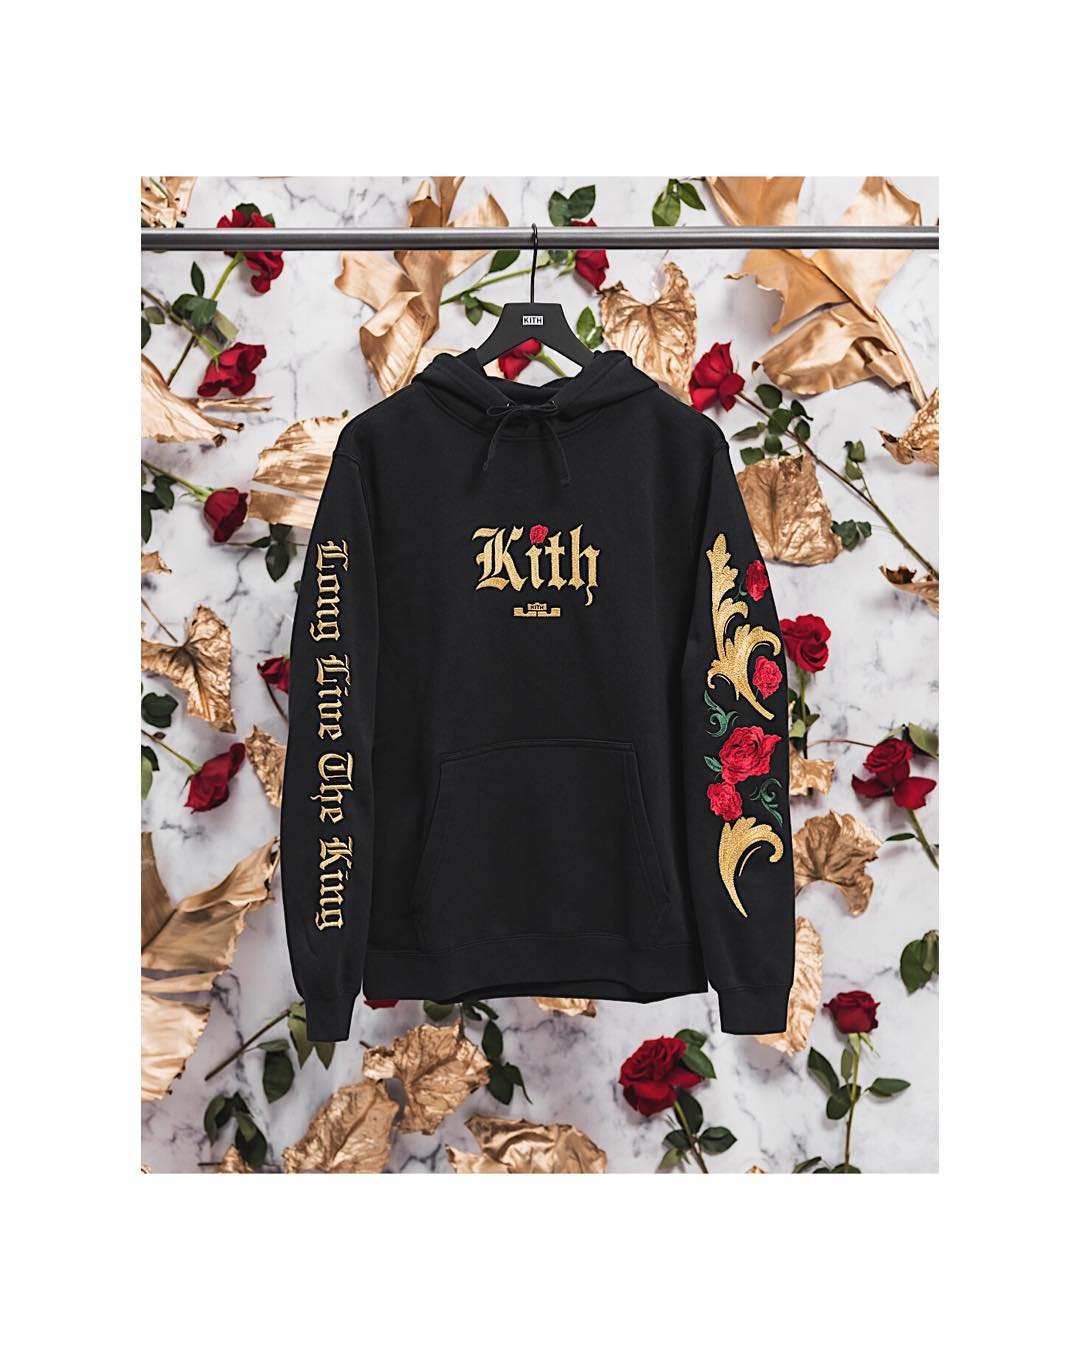 kith-nike-lebron-15-long-live-the-king-2-collection-release-20180216